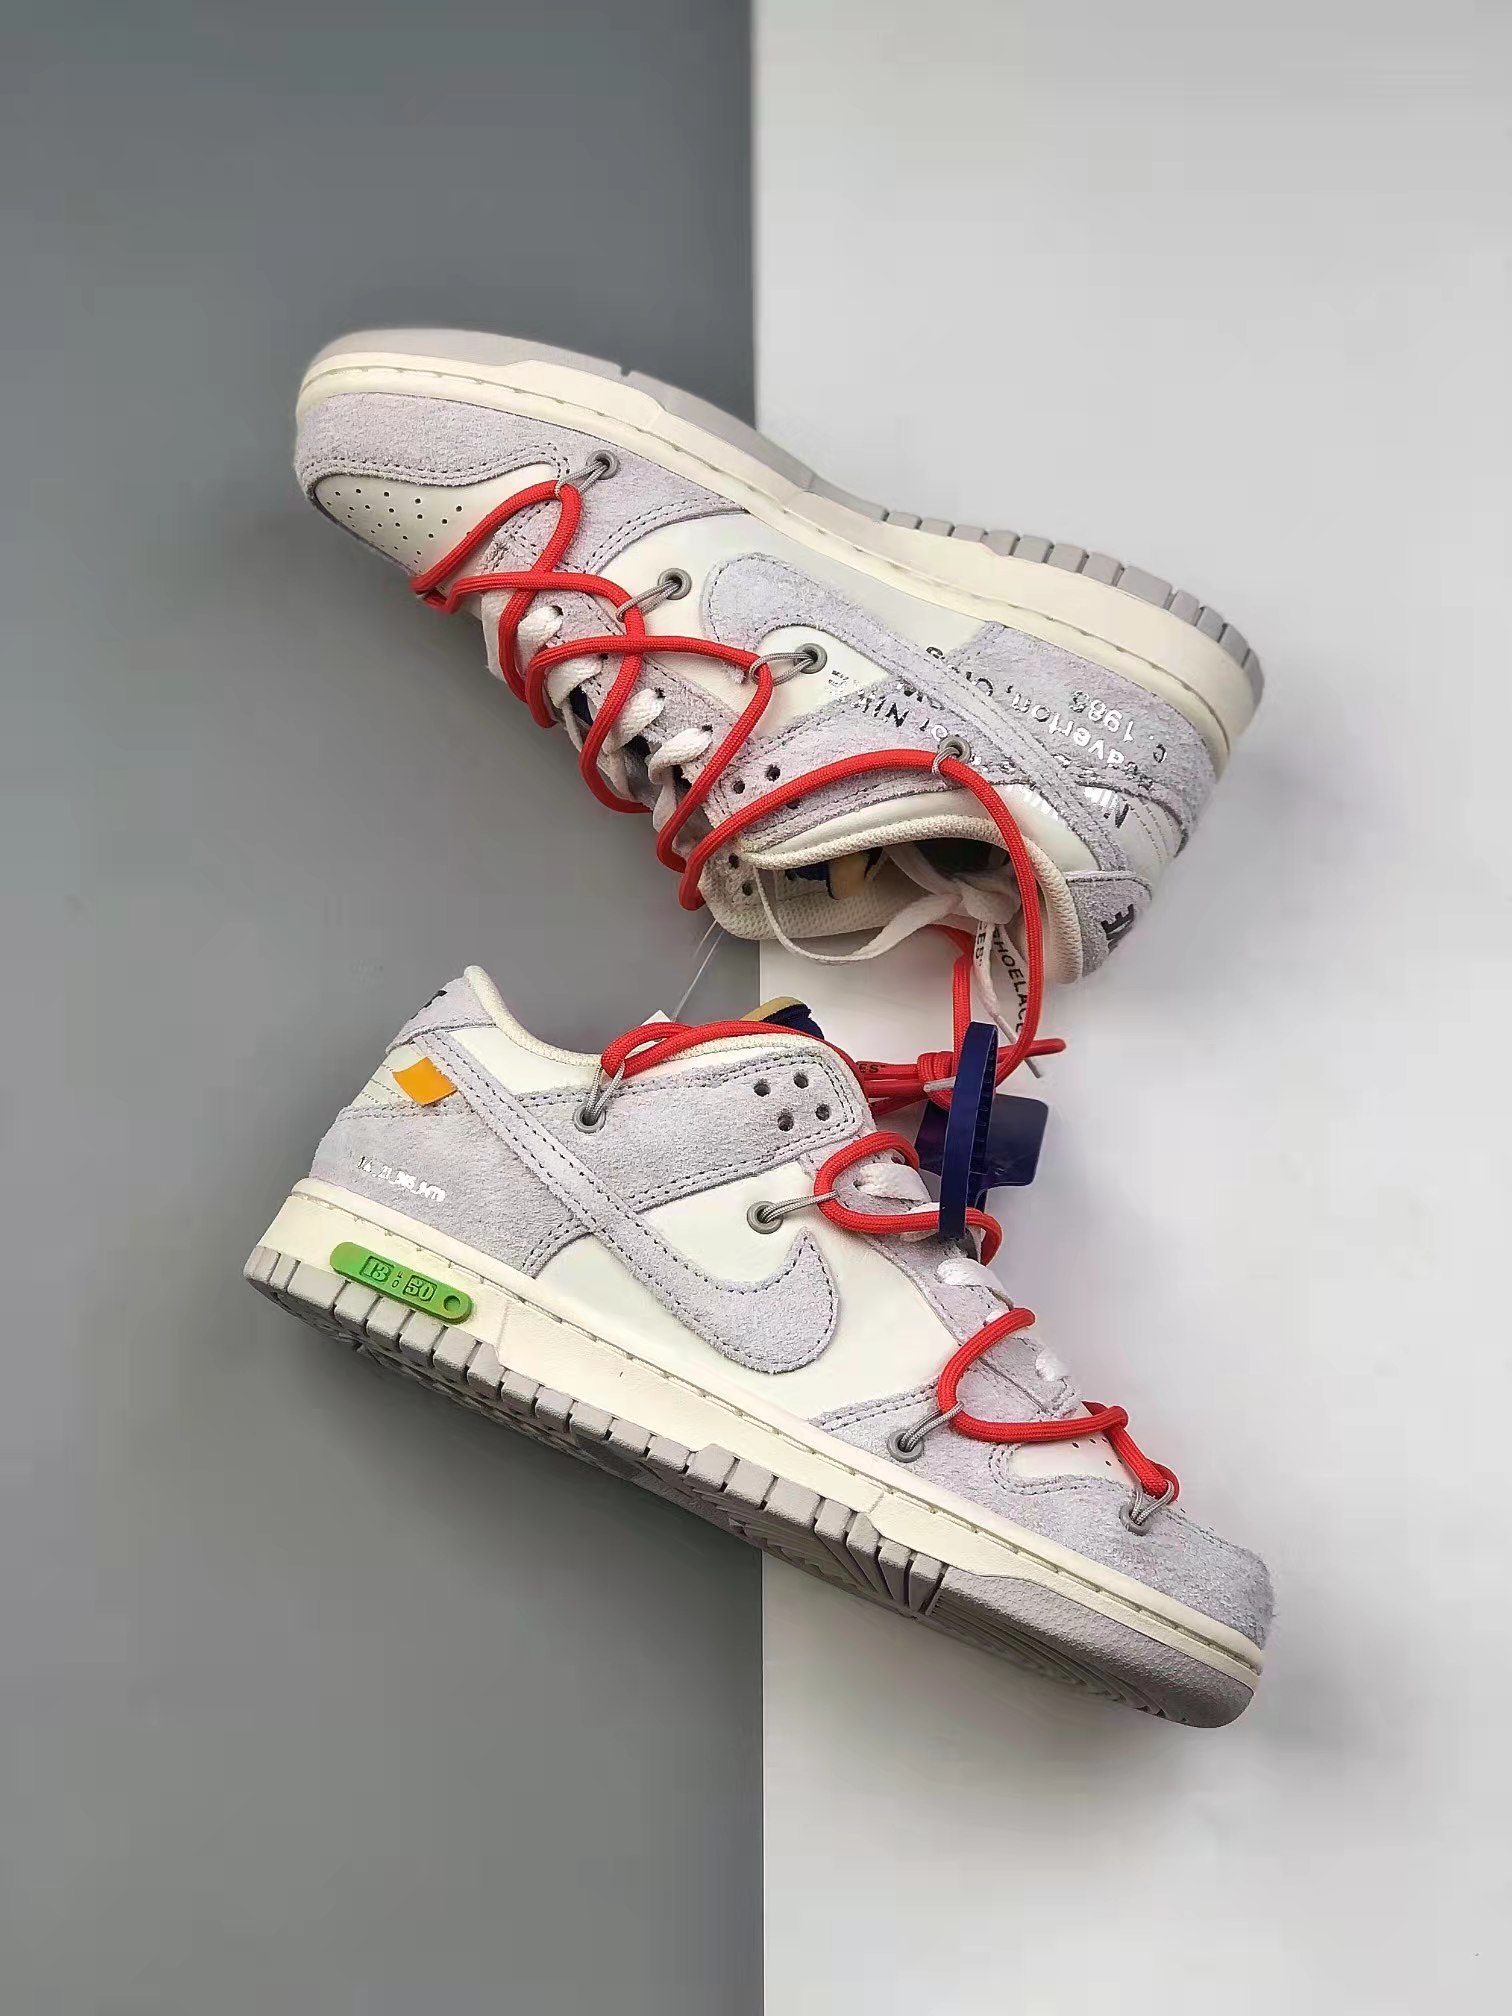 Nike Off-White x Dunk Low 'Lot 13 of 50' DJ0950-110: Exclusive Limited Edition Collaboration